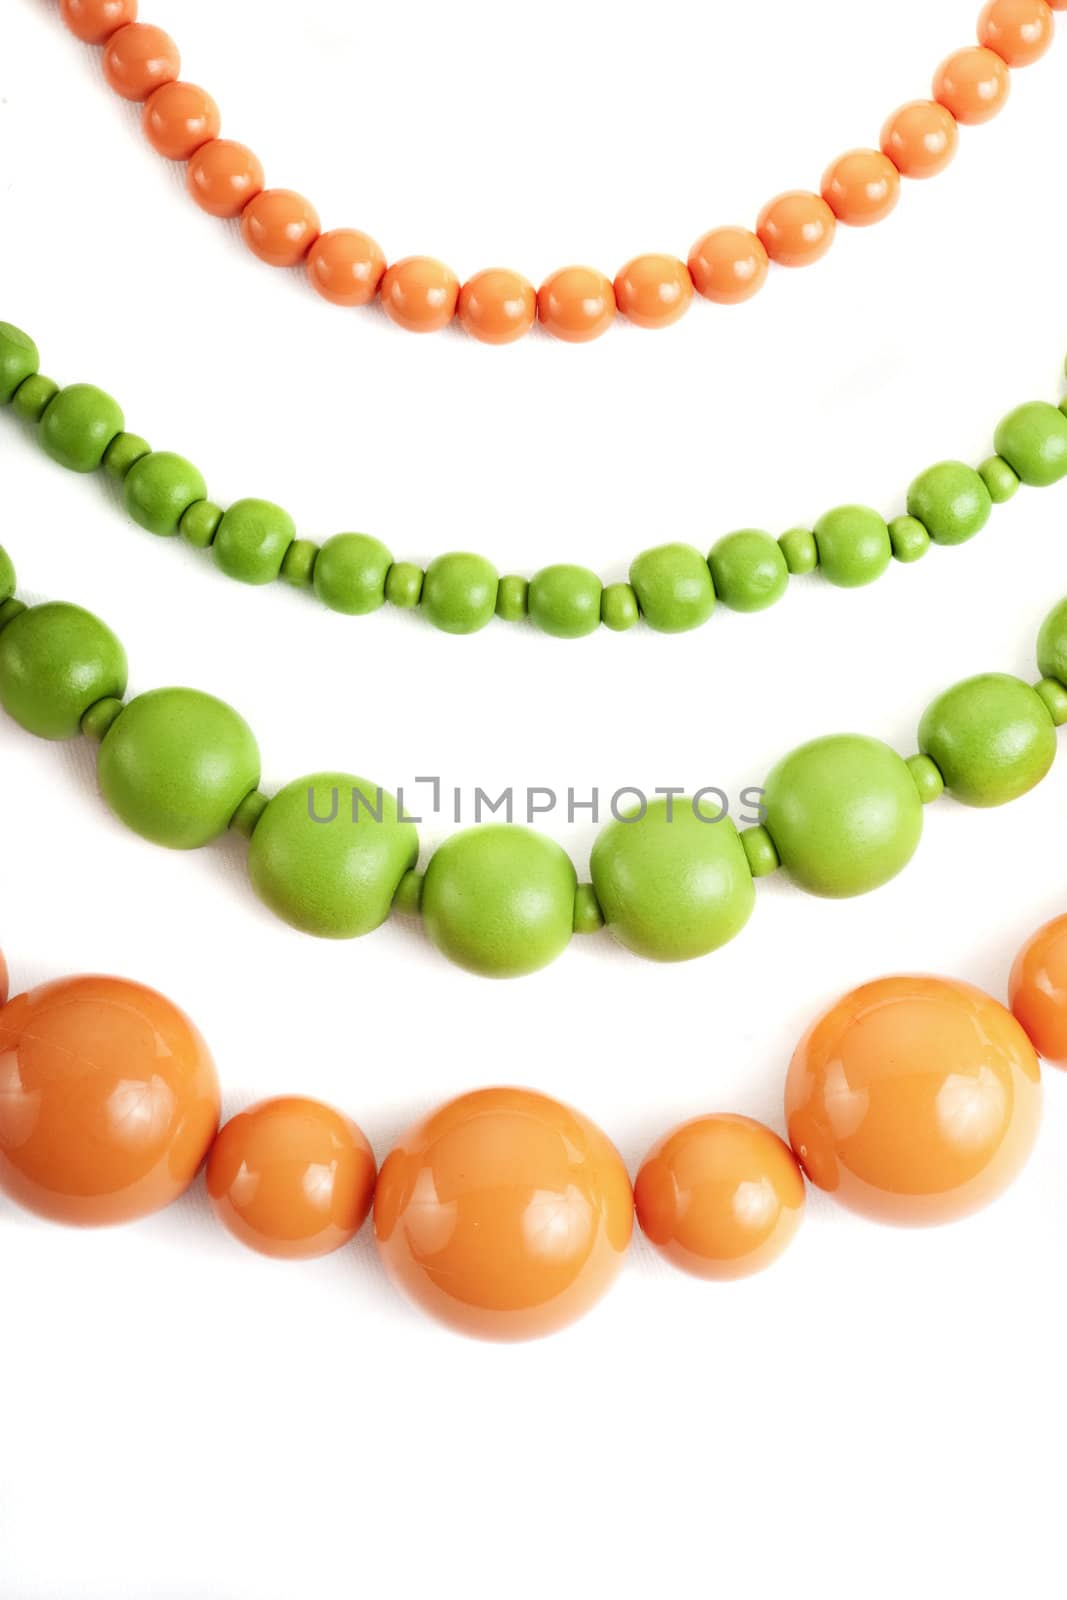 Orange and green colored necklace